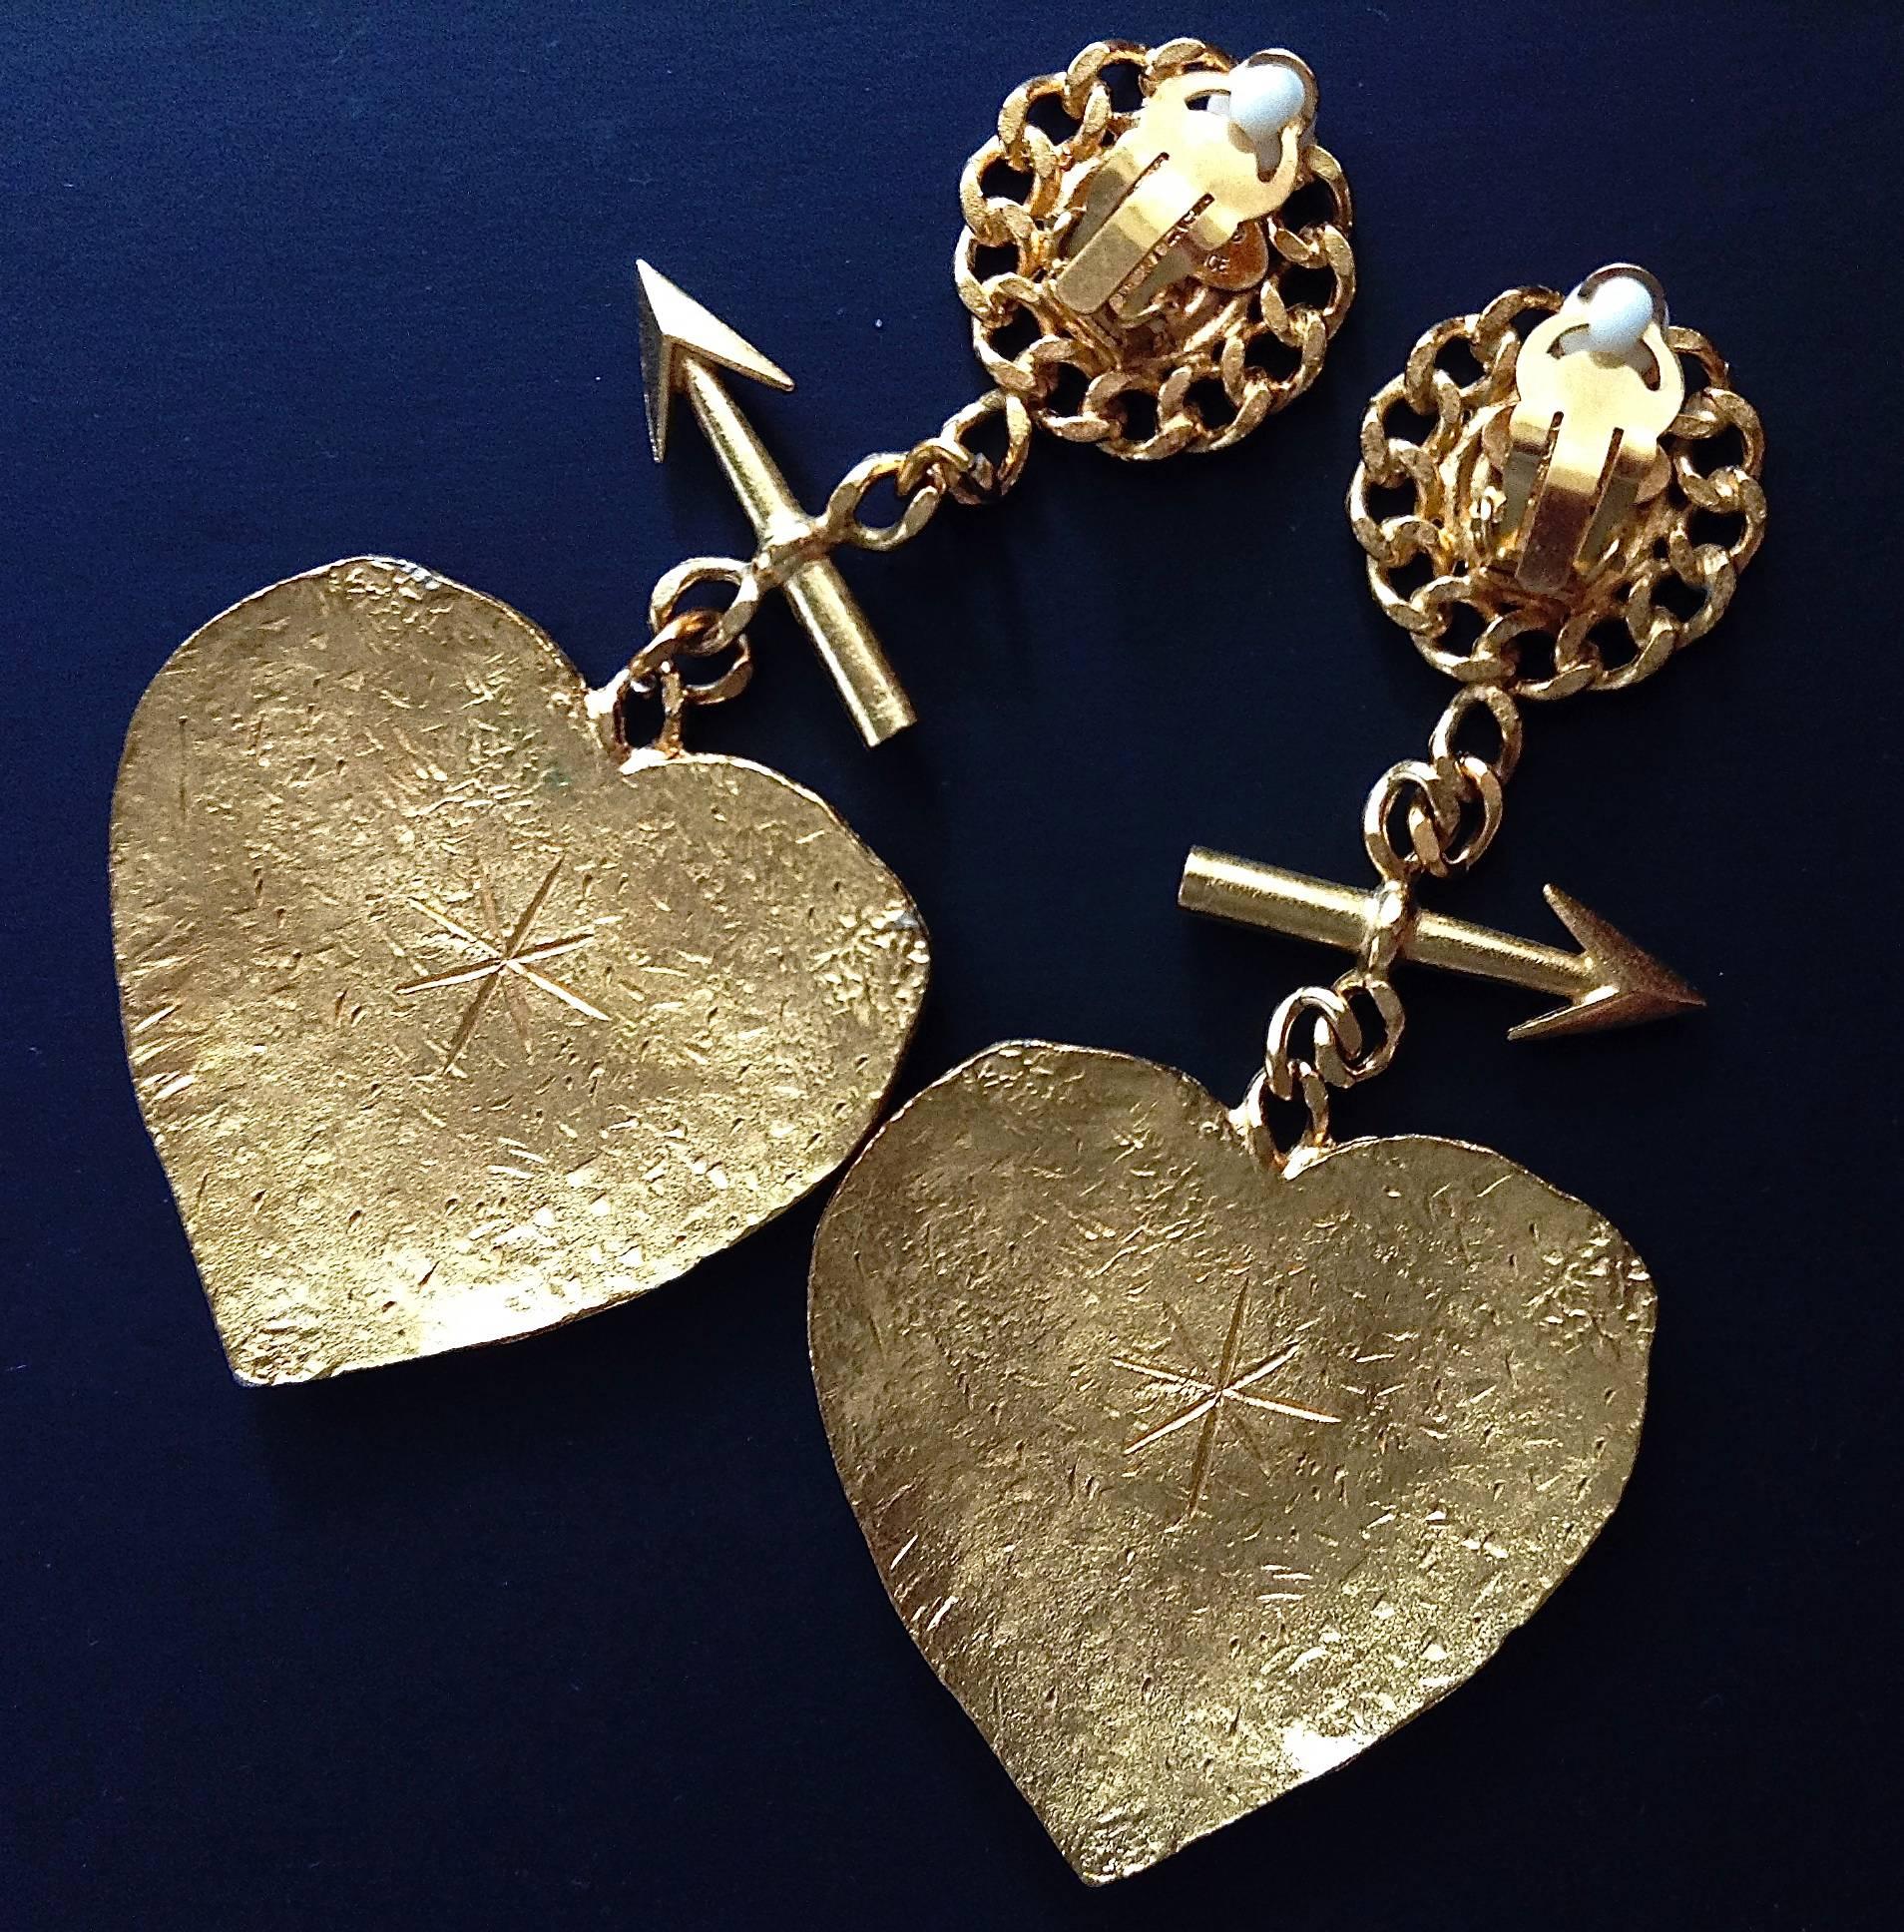 THESE rare oversized earrings are complete version of this famous 93P arrow heart series.
  1993, one of the best year of Chanel costume jewellery history. 
  In EX long design and dangled with jumbo sized heart. Done with fun graffiti to the